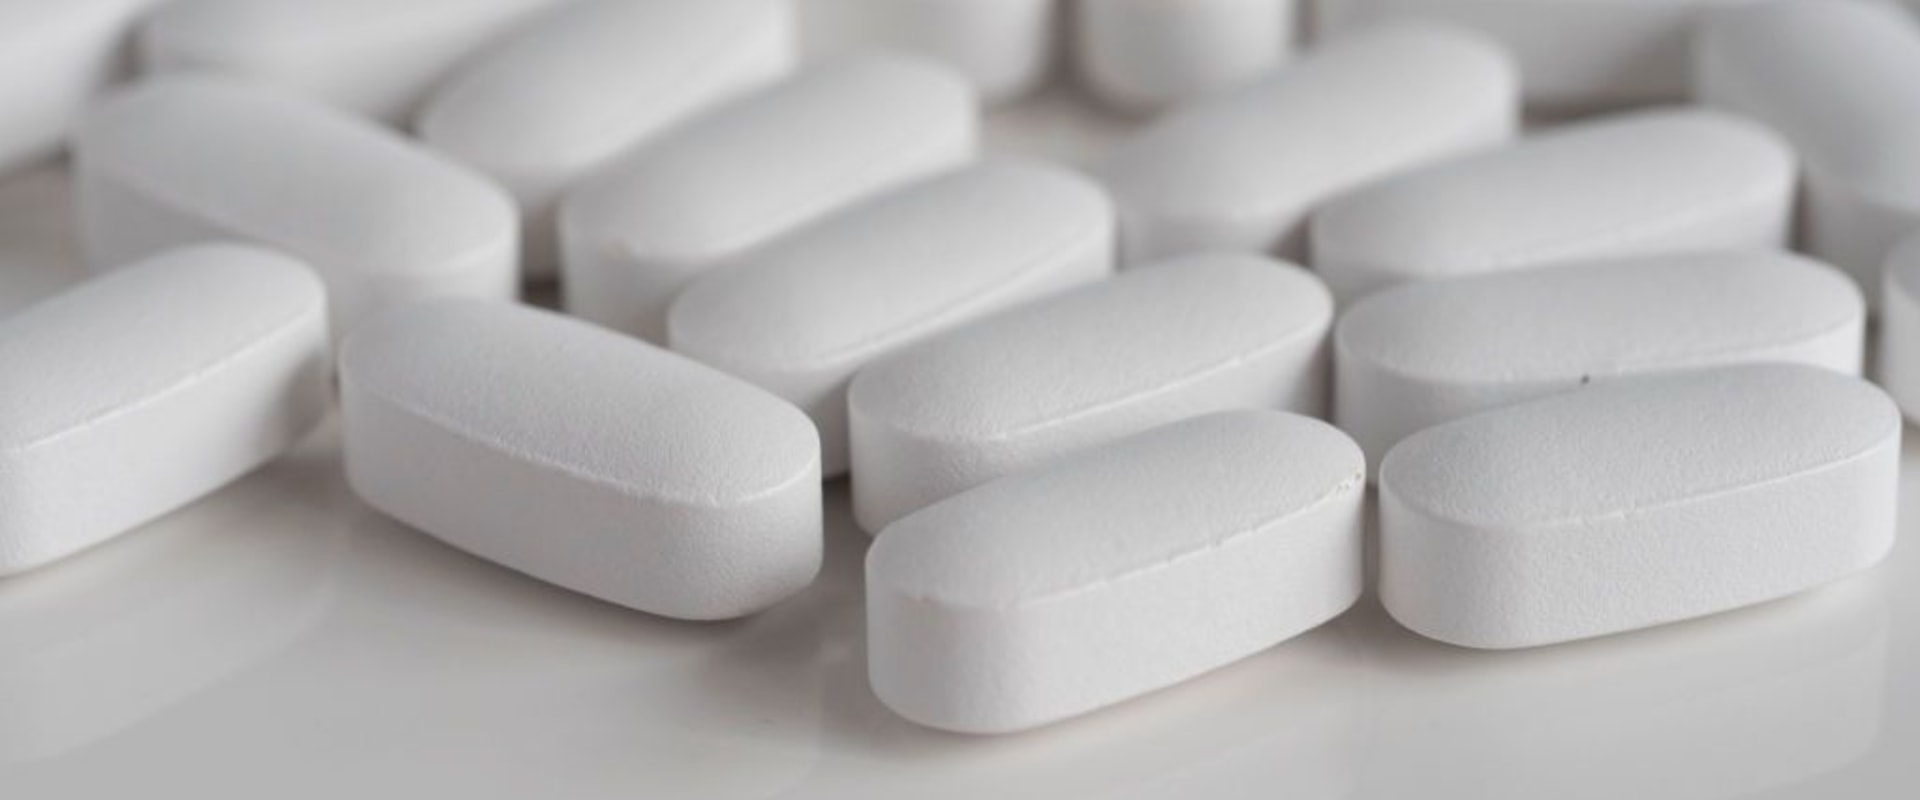 What supplements should not be taken with glucosamine?